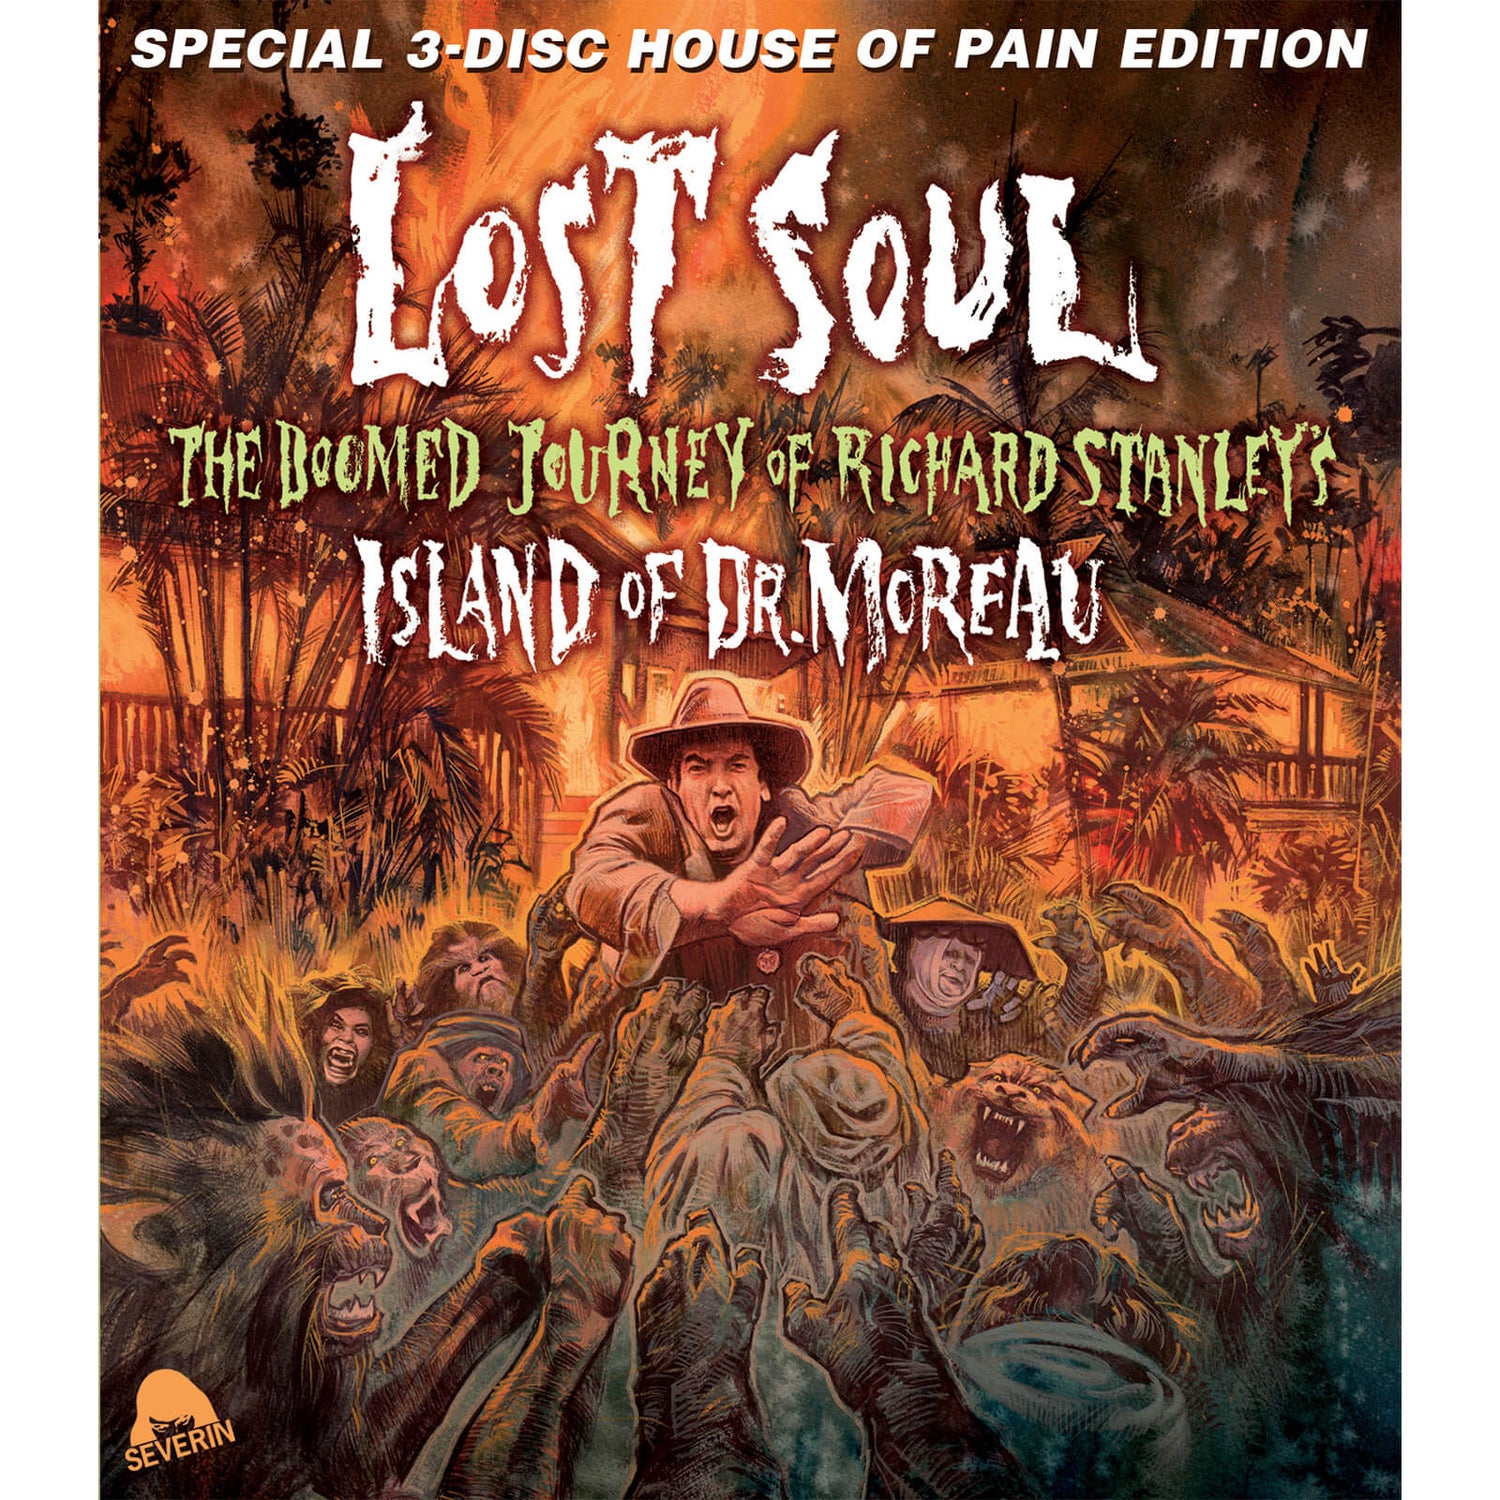 Lost Soul: The Doomed Journey of Richard Stanley's Island of Dr. Moreau - House Of Pain Edition (Includes CD)